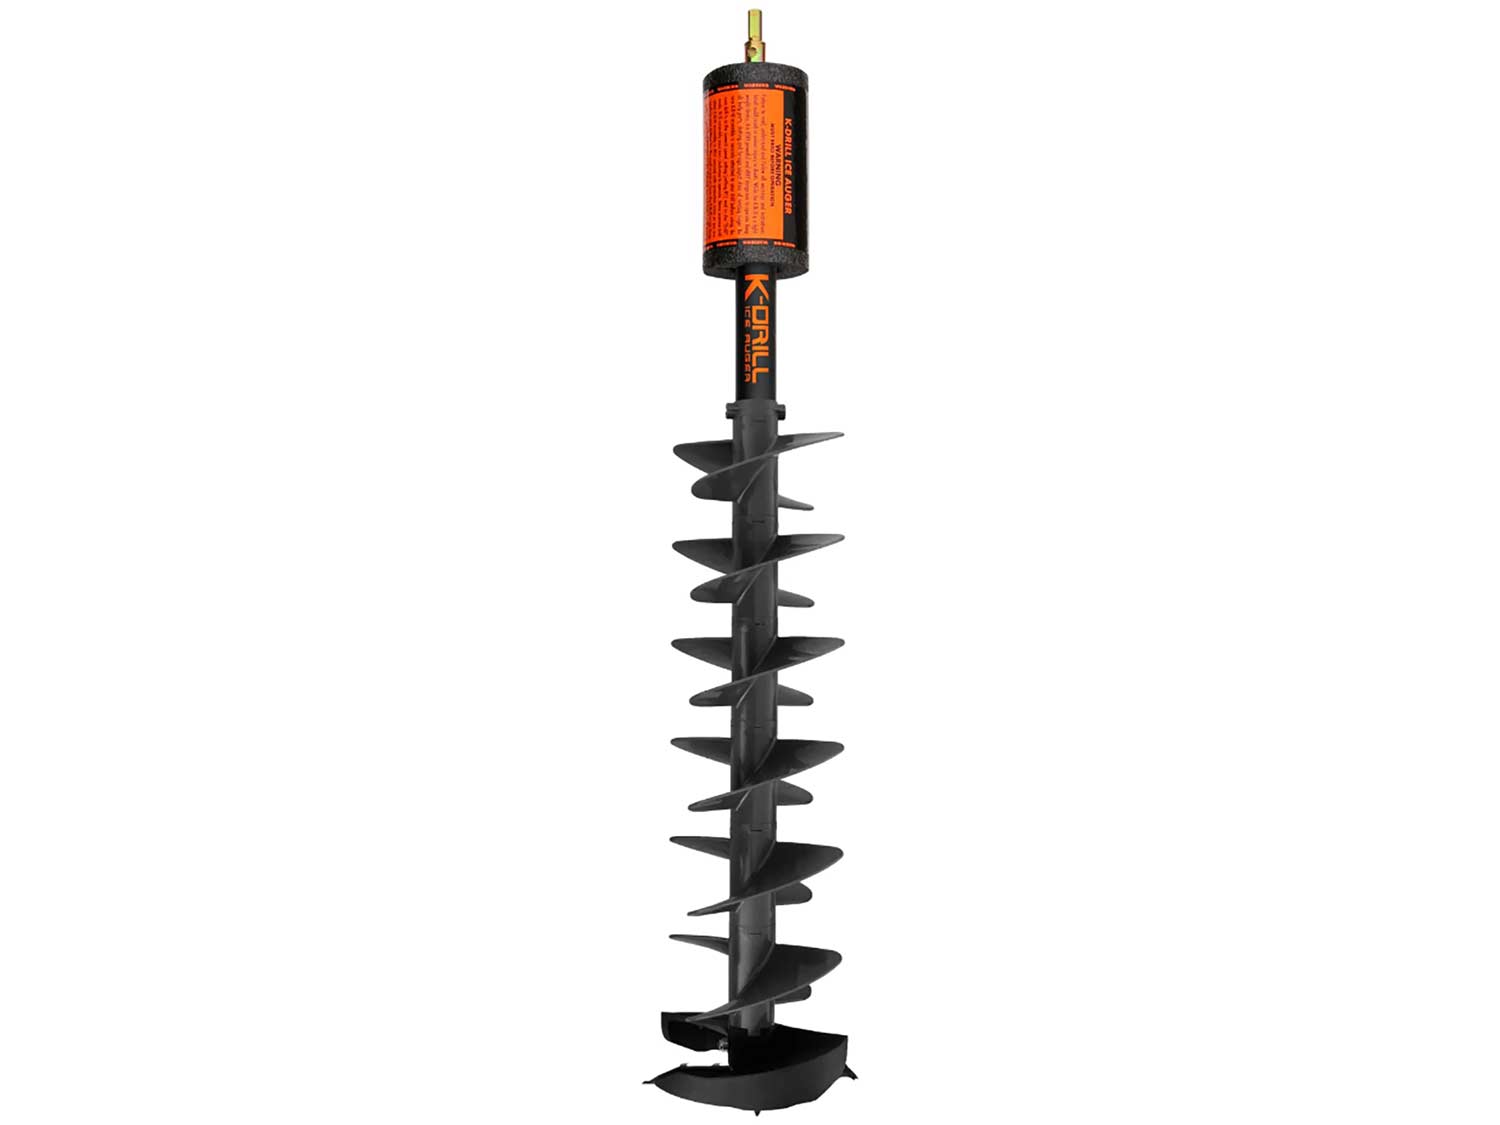 K-Drill Ice Auger